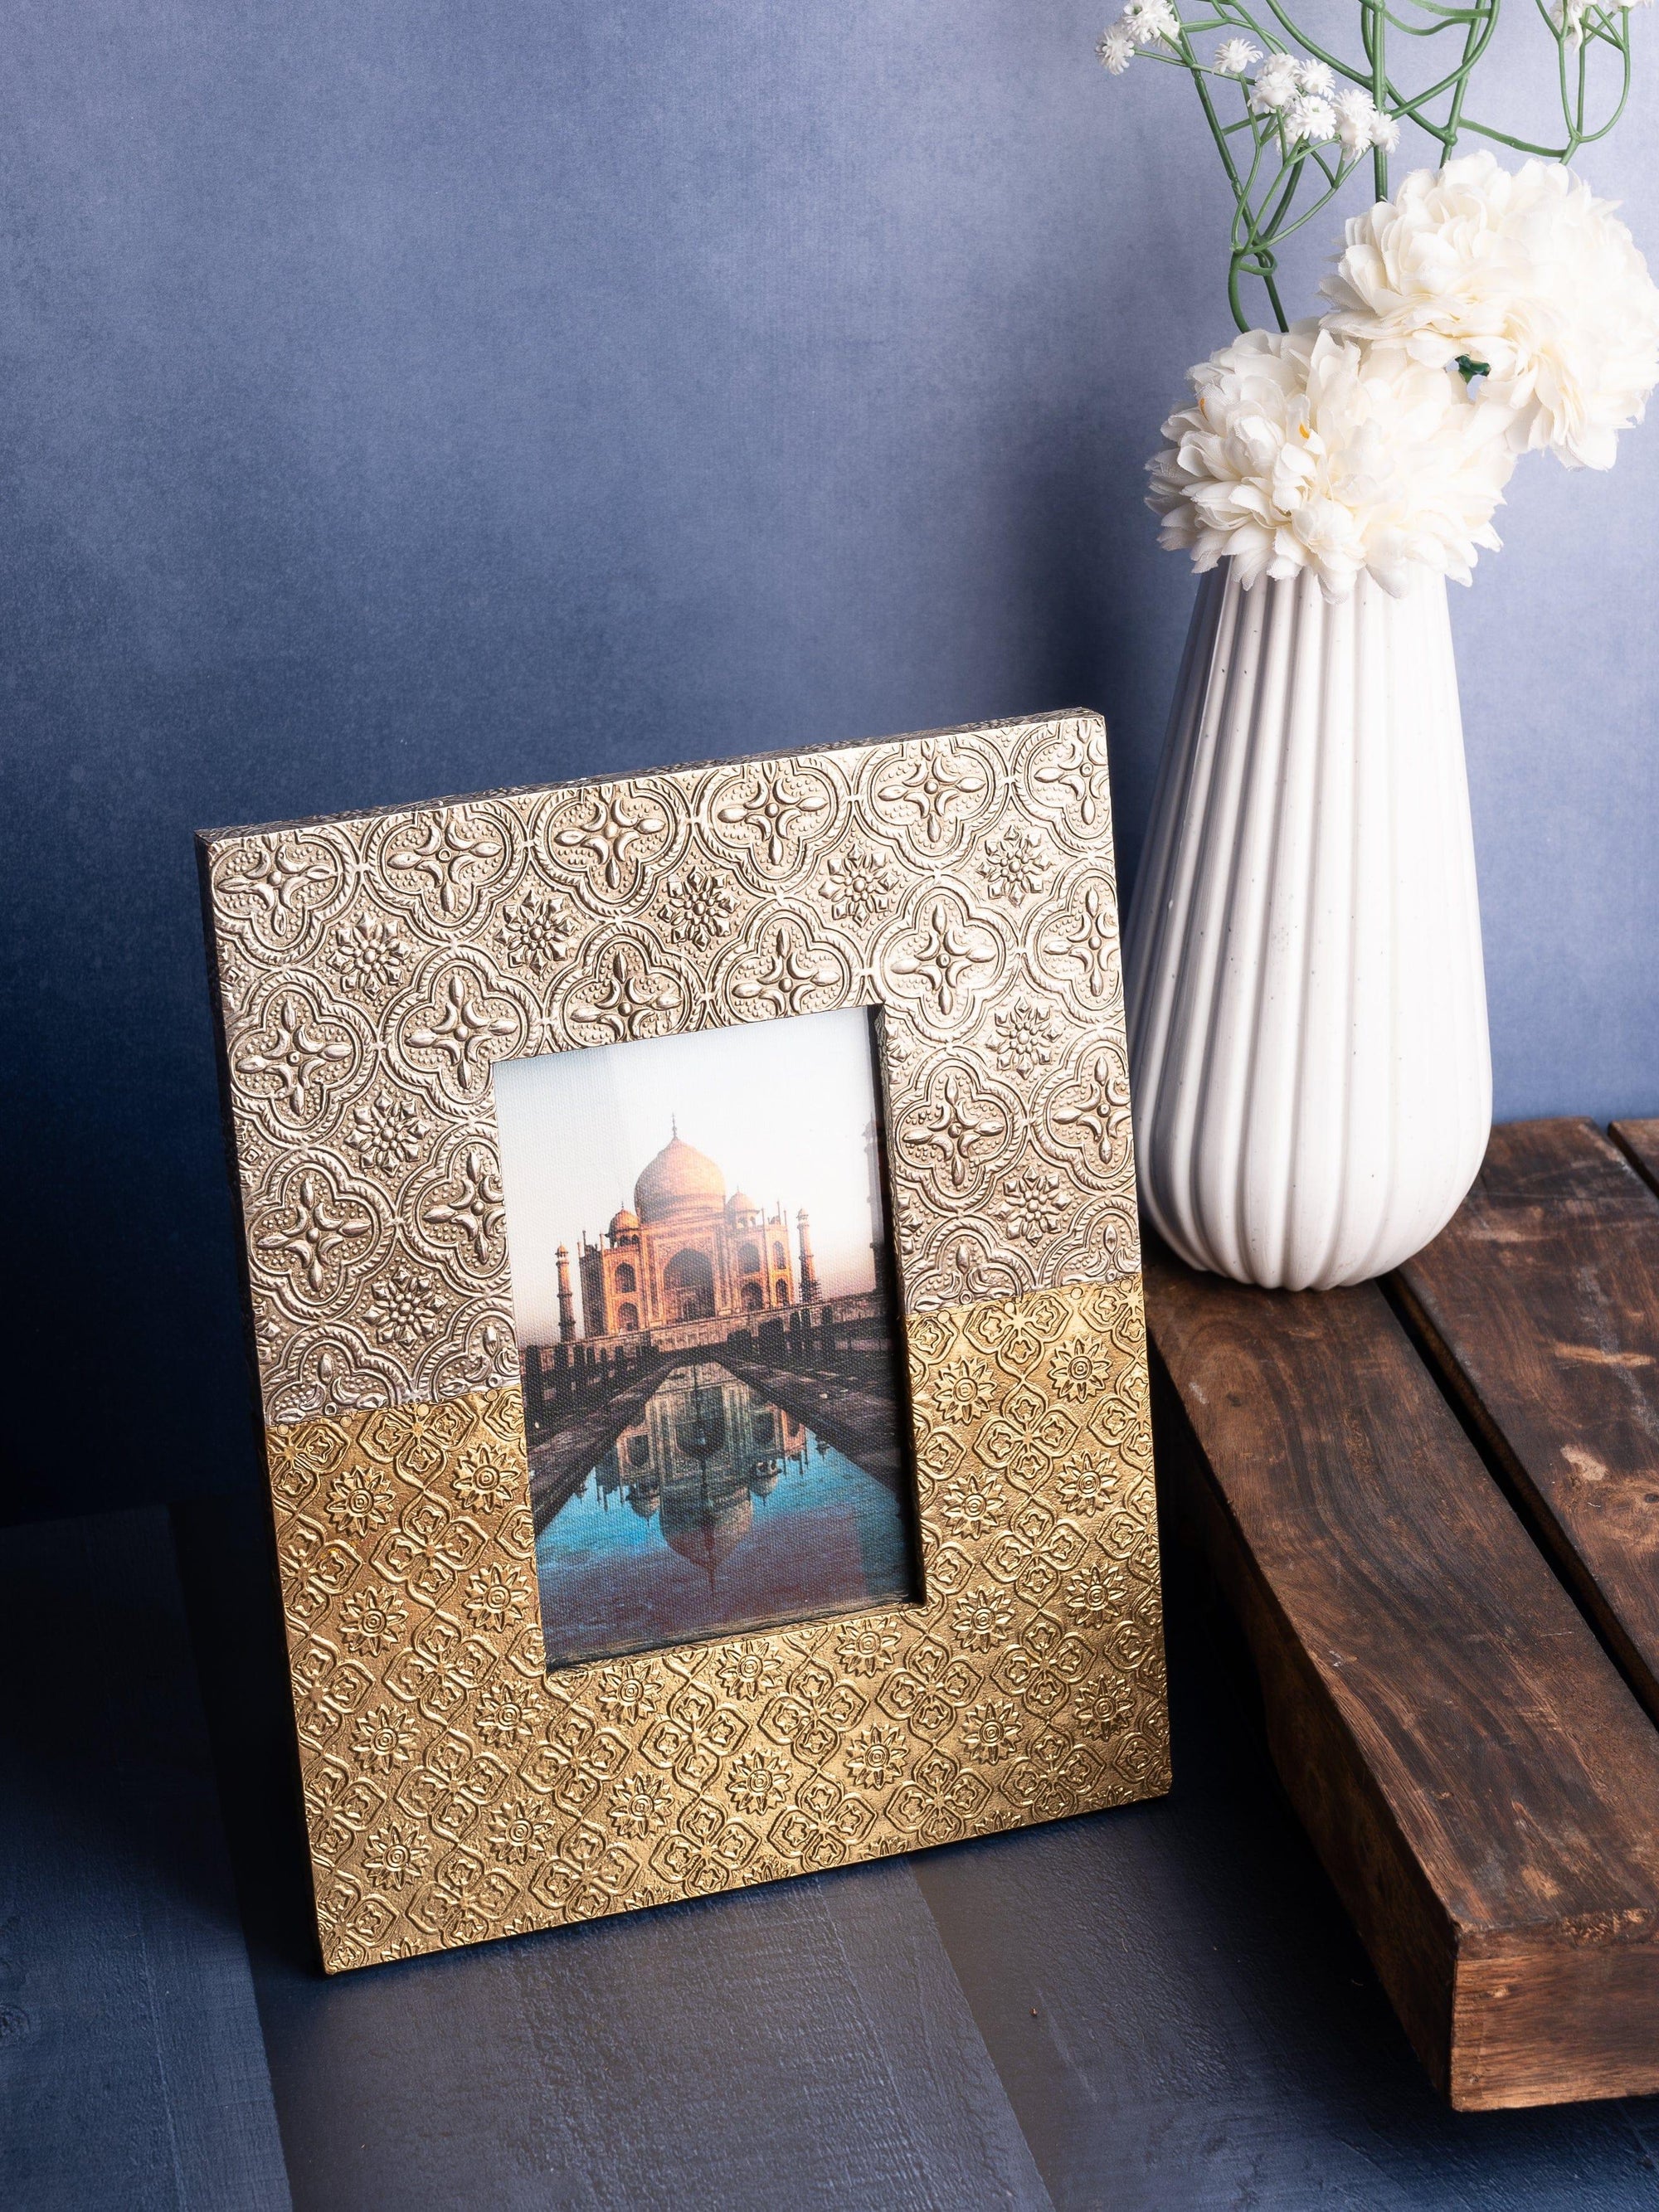 Meenakari Work Table Top Photo Frame in Dual Tone Color - Photo size 8x14 cms - The Heritage Artifacts